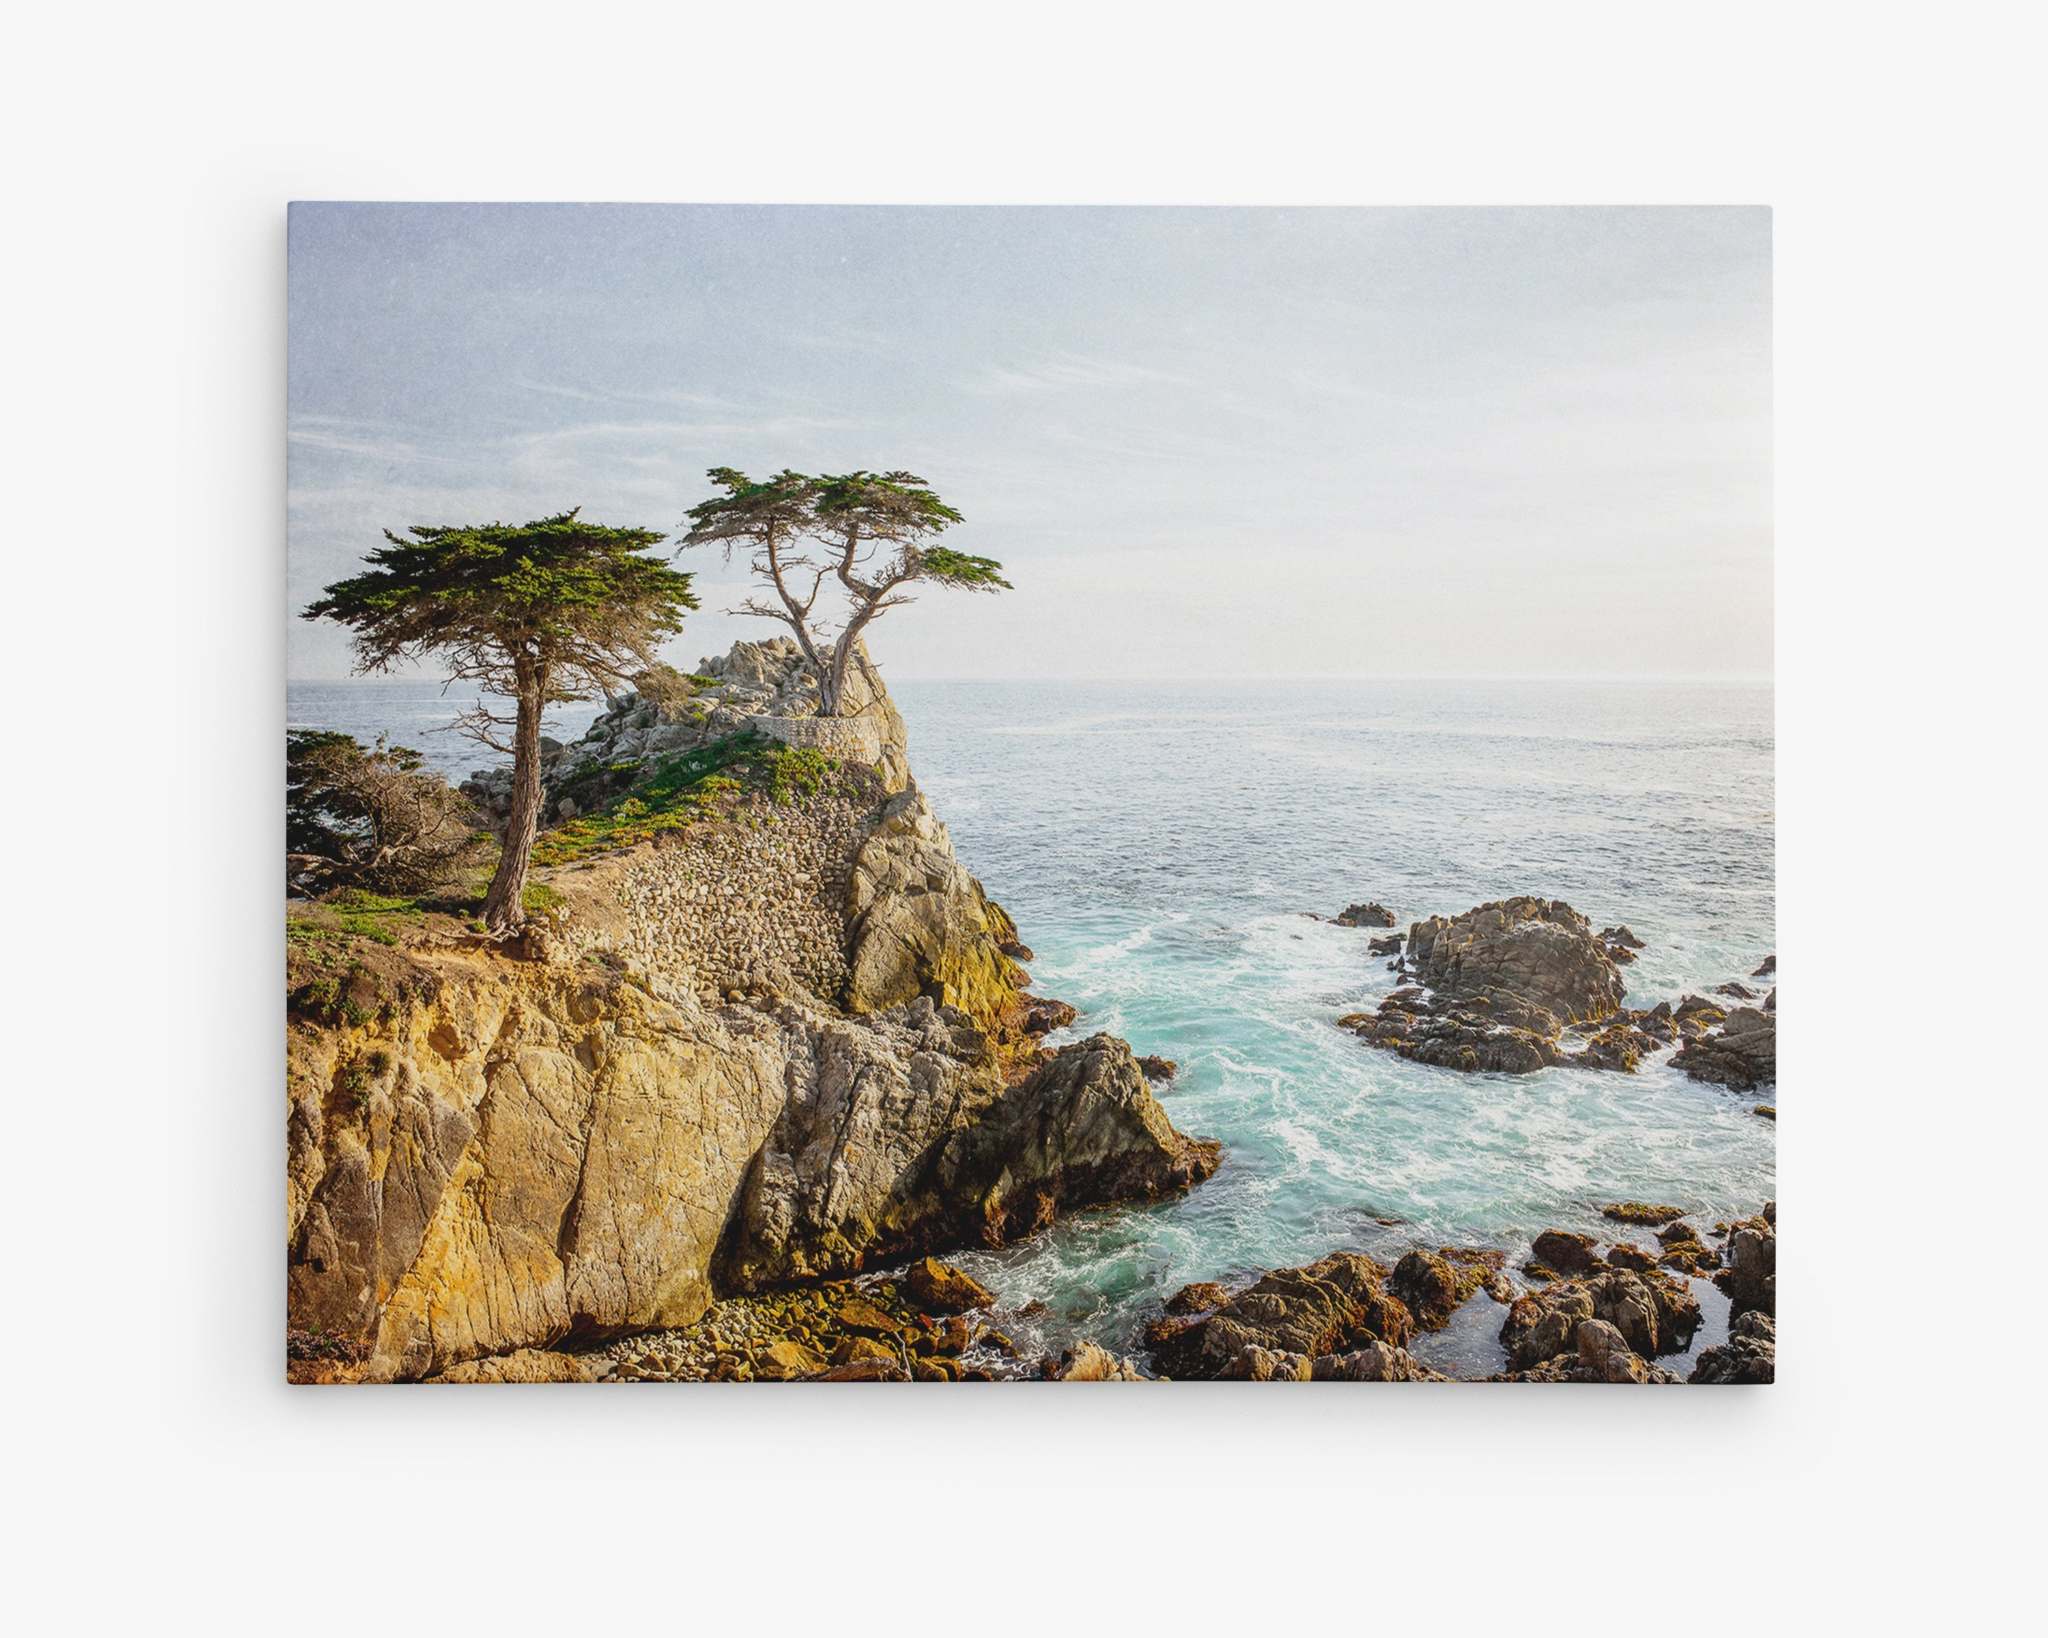 A scenic view of a rocky coastline with a few windswept trees on top of a cliff overlooking the ocean. The sky is clear with a few wispy clouds, and waves crash gently against the rocks below. This tranquil and picturesque setting is perfect for Offley Green's California Coastal Canvas Wall Art, 'Lone Cypress', on premium artist-grade canvas.